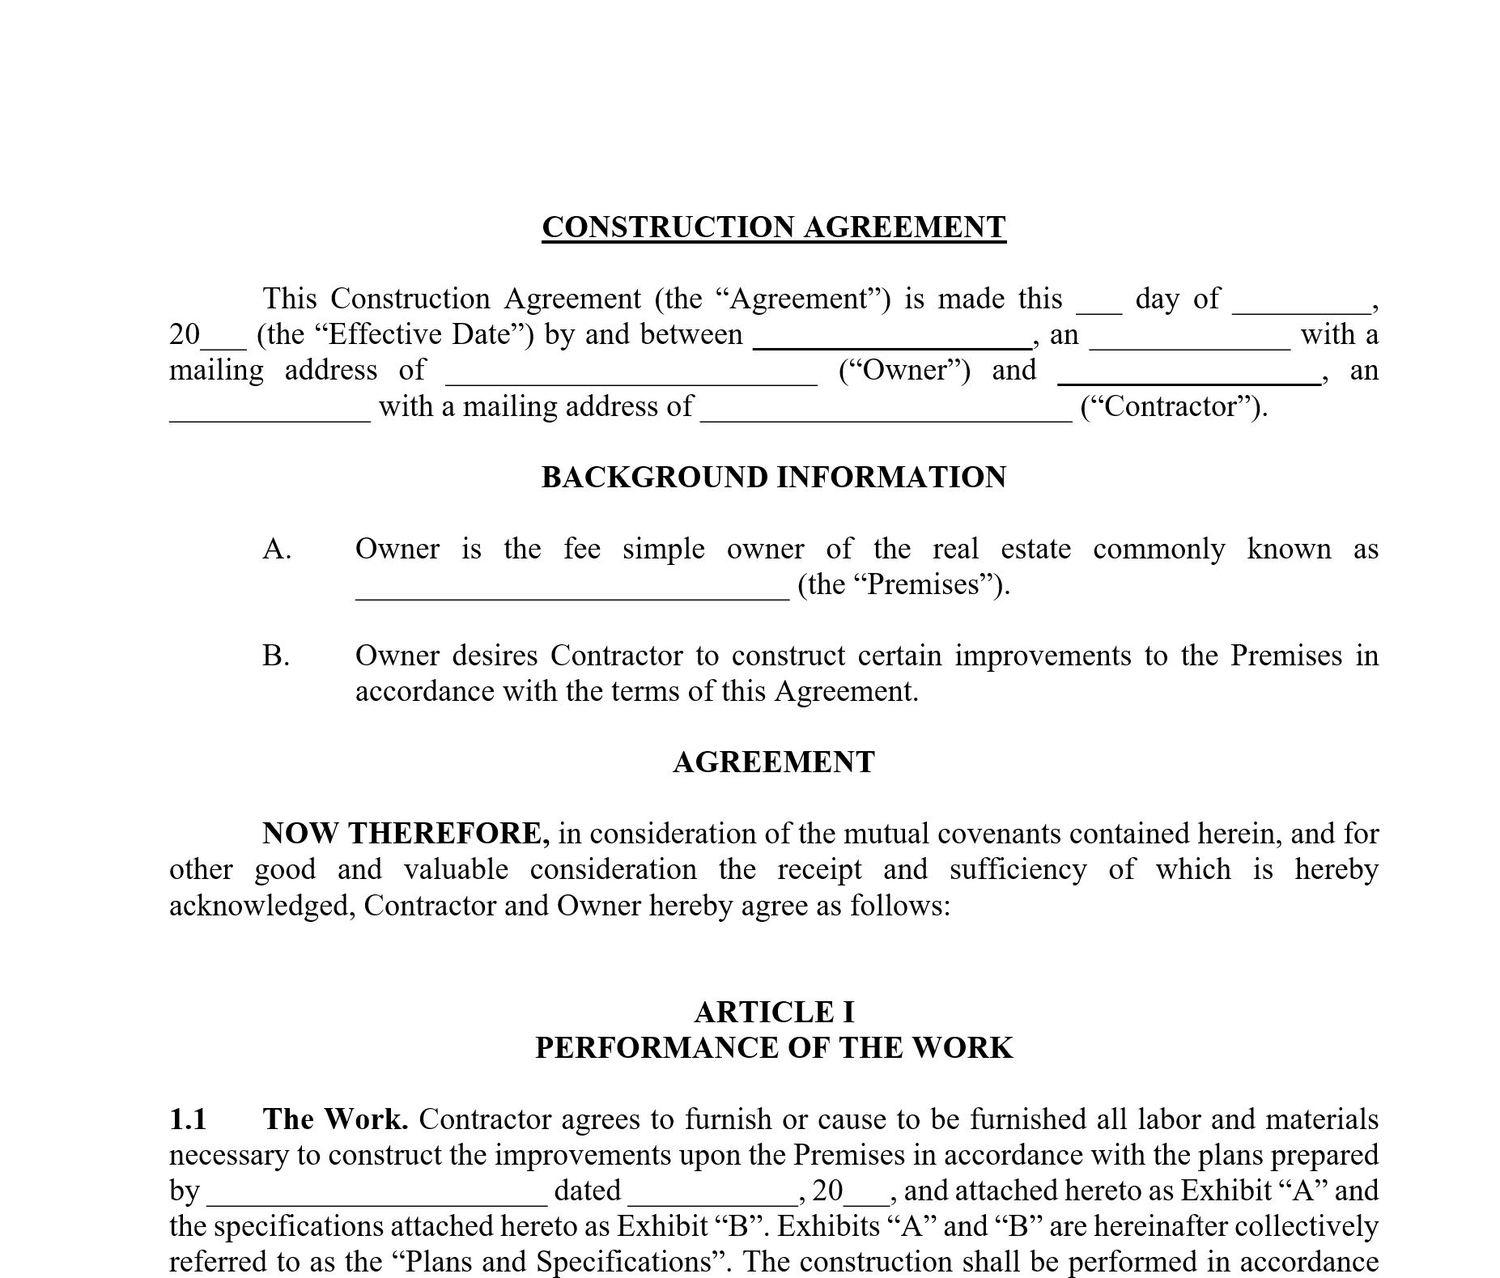 Construction Contract Template - ApproveMe - Free Contract Templates With pre contract deposit agreement template